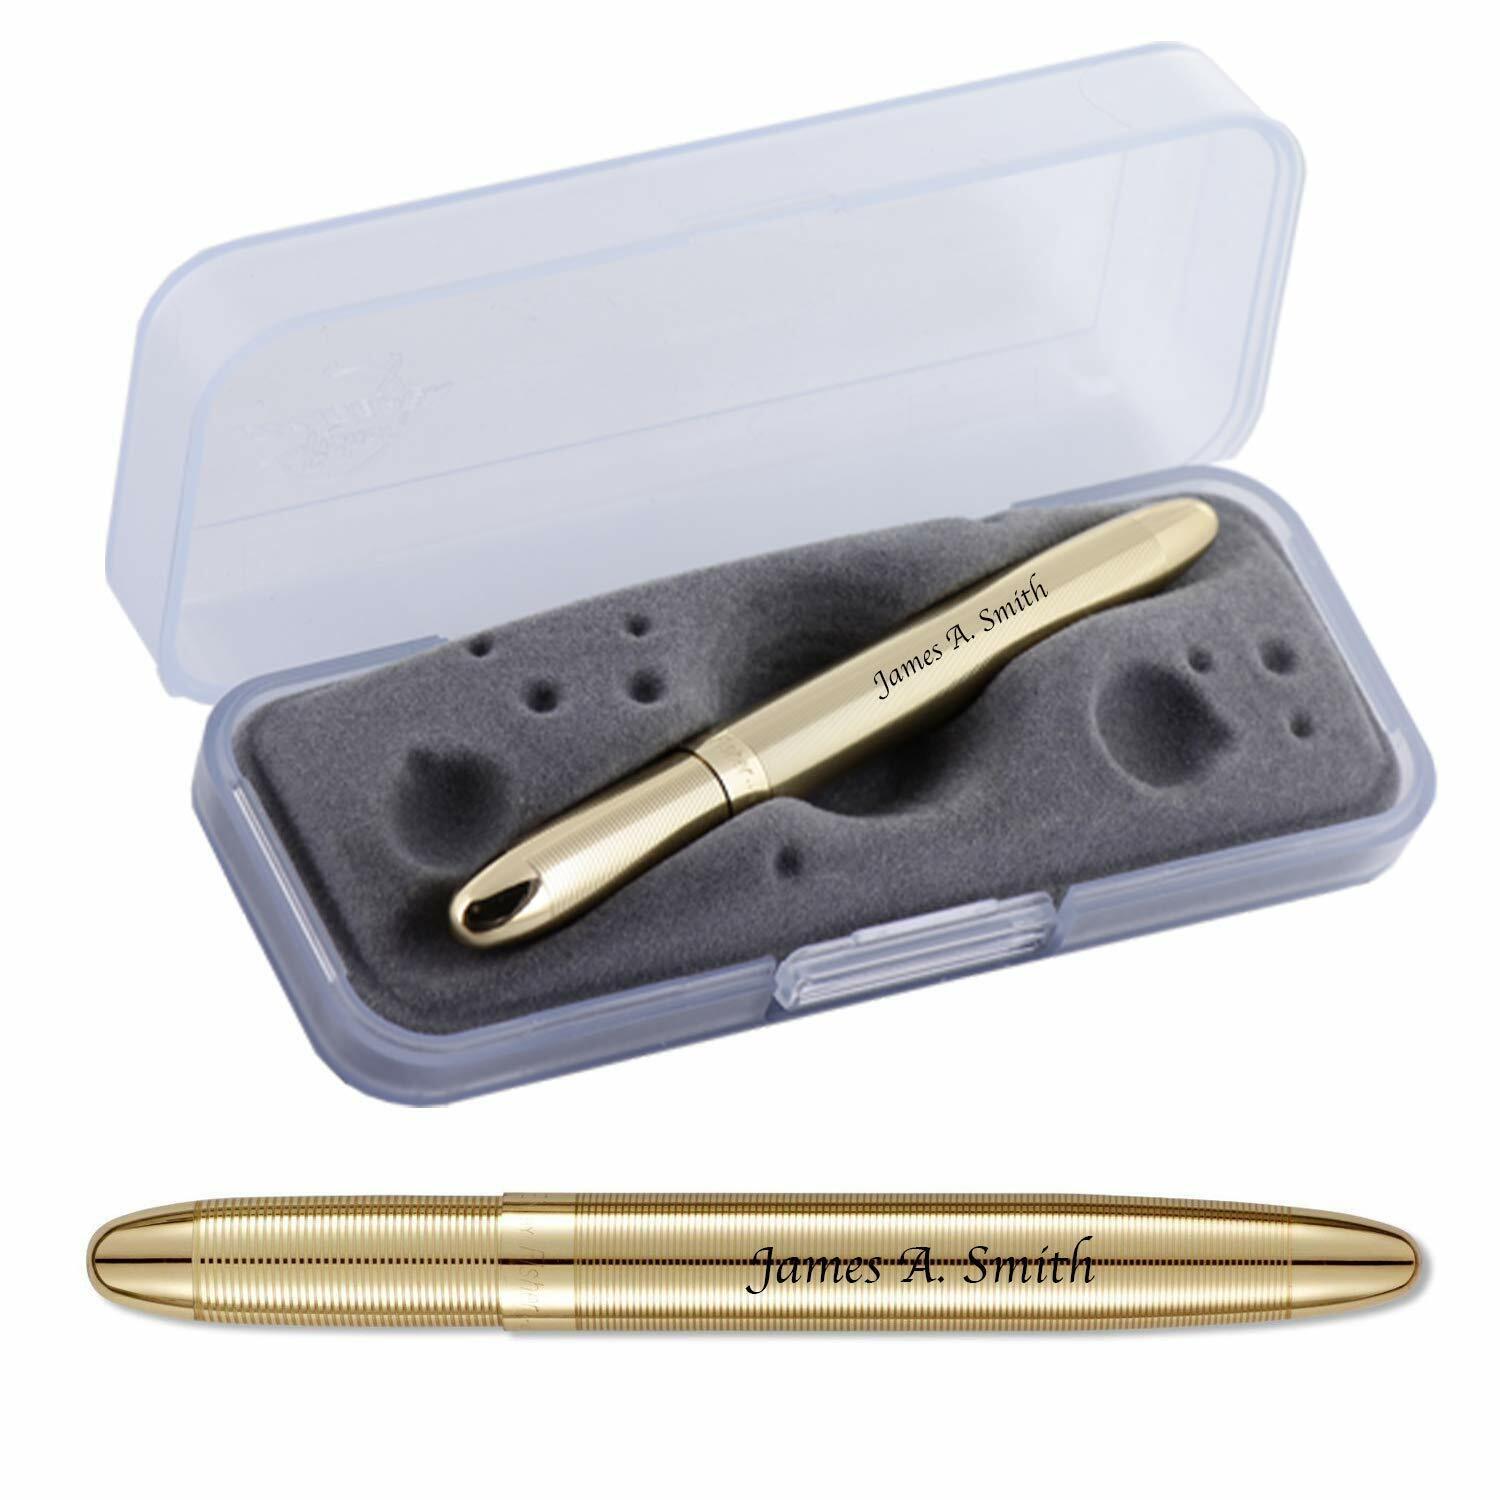 1 Personalized/Engraved Gold Fisher Bullet Space Ballpoint Pen with Box 400G